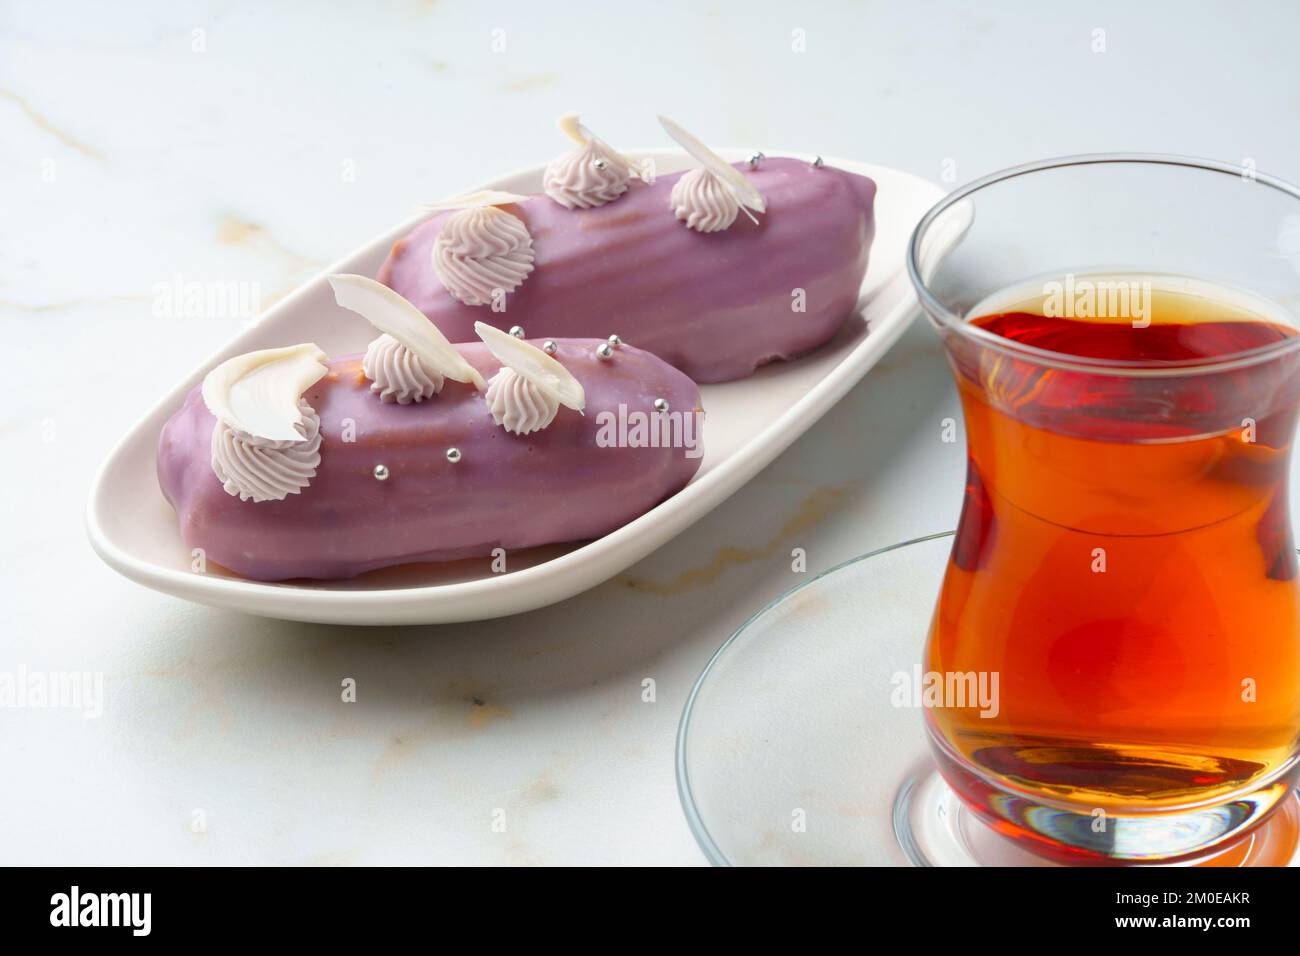 Two eclair cakes with violet frosting on white plate Stock Photo